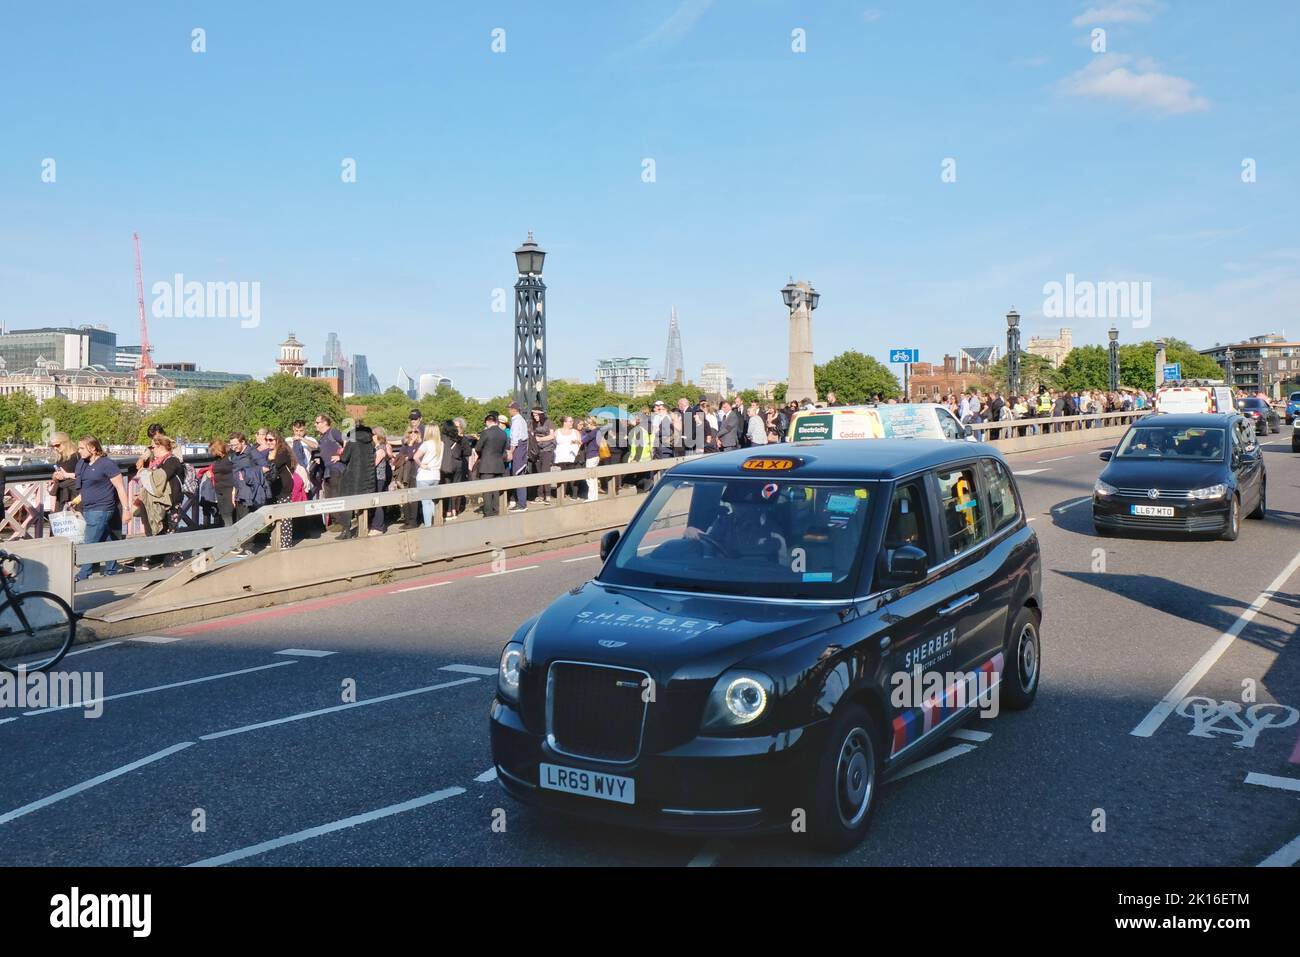 London, UK. Mourners queue on Lambeth Bridge in order to pay their respects to the Queen as she lies-in-state for four days before her funeral. Stock Photo